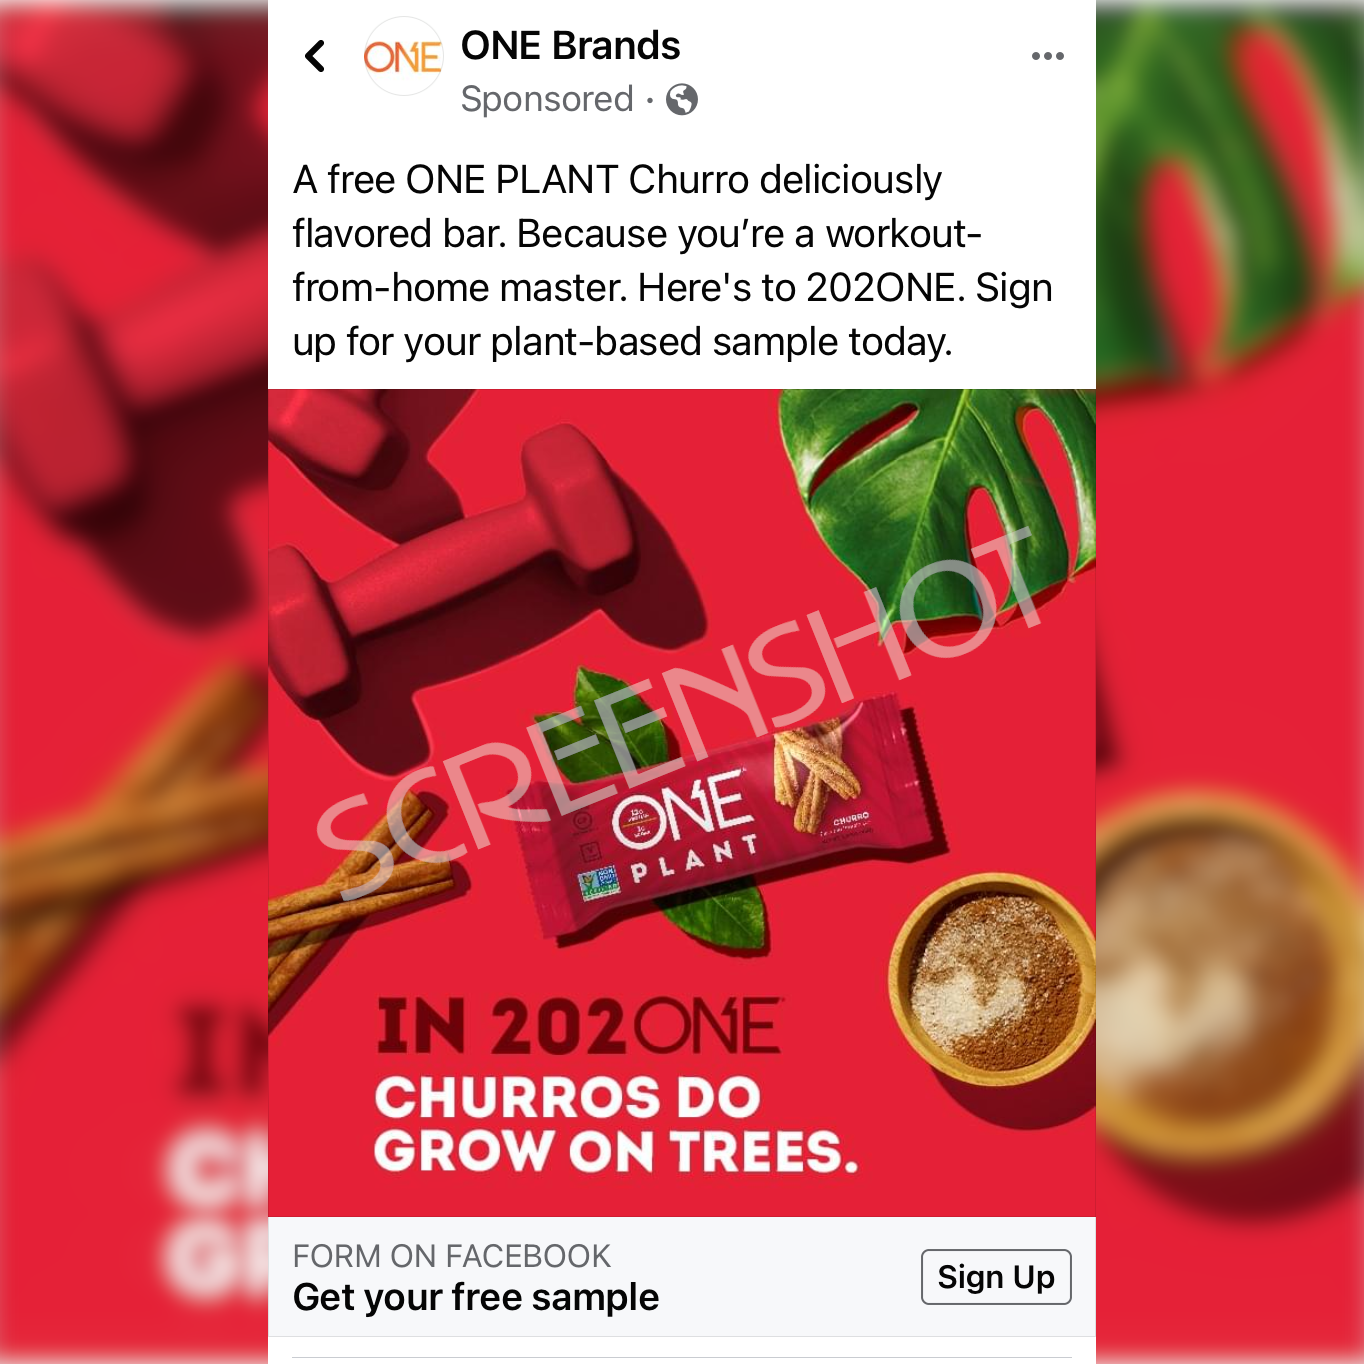 Possible Free ONE PLANT Churro Flavored Bar Sample on Facebook